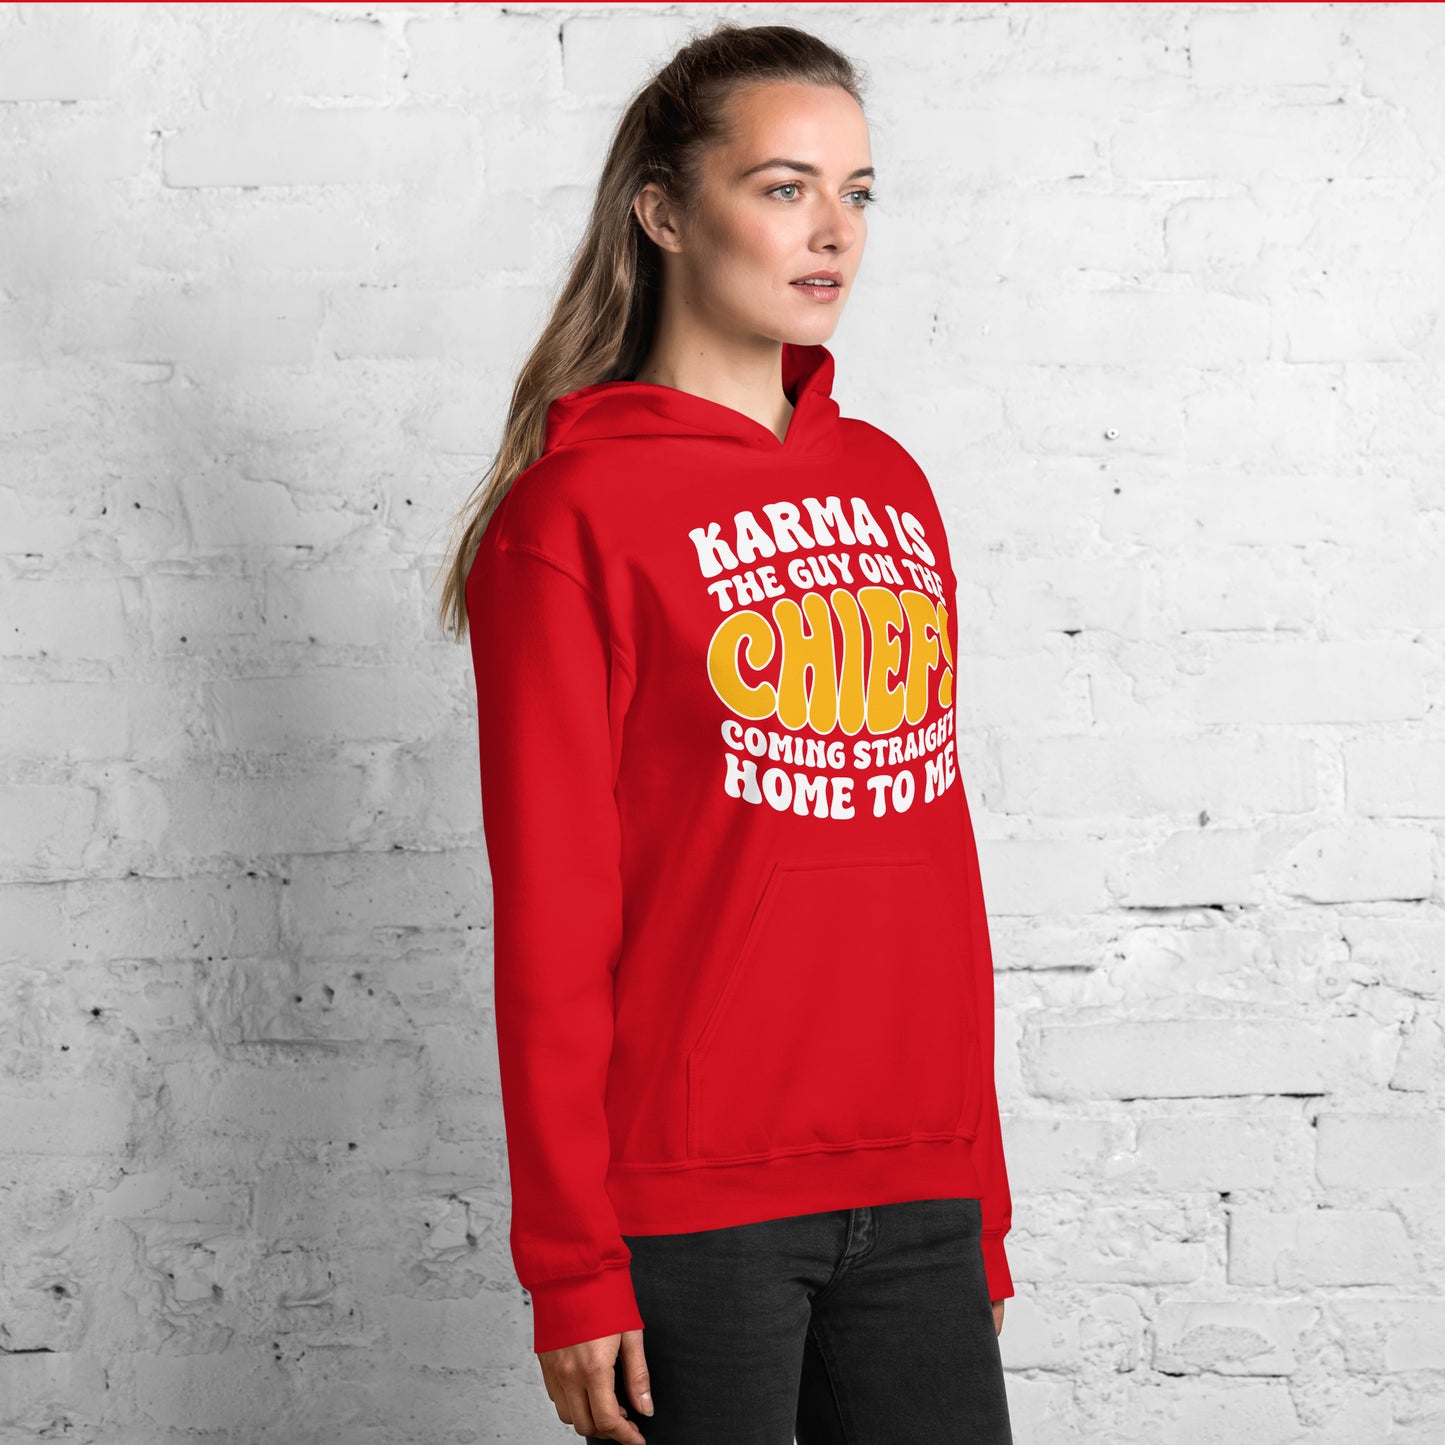 Karma Is The Guy On The Chiefs Unisex Hoodie (Red)